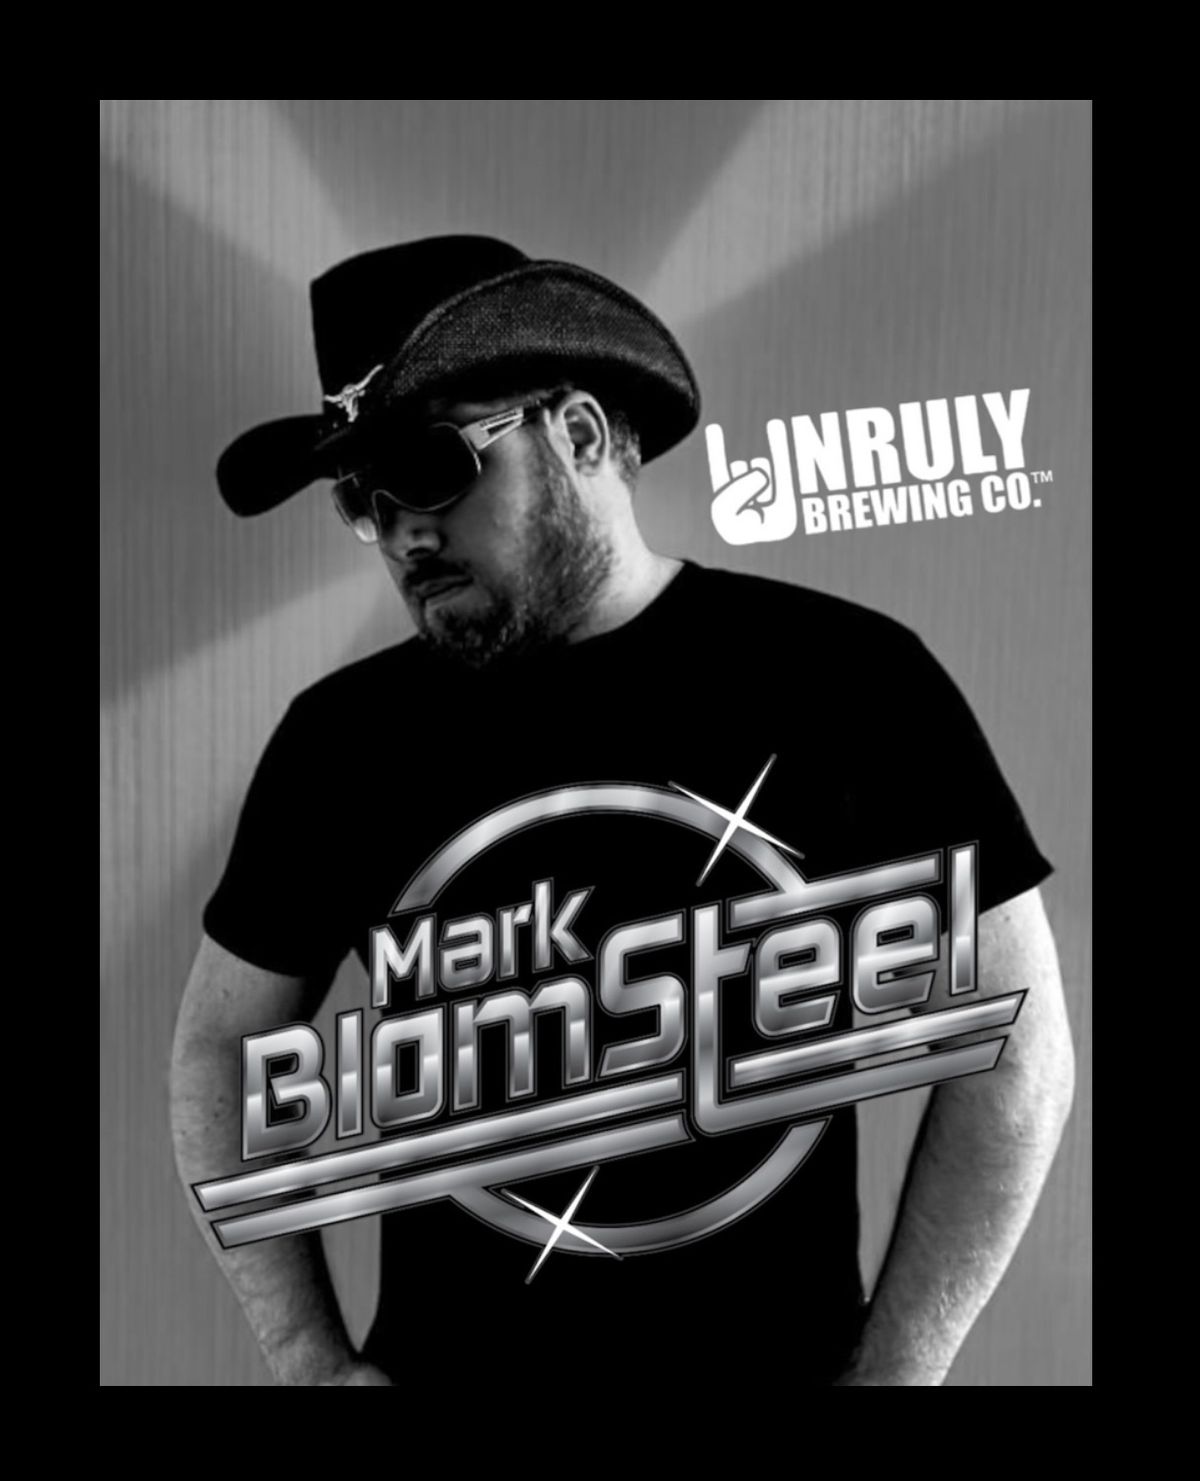 Brews & Tunes: Mark Blomsteel Live at Unruly Brewing Company!?!